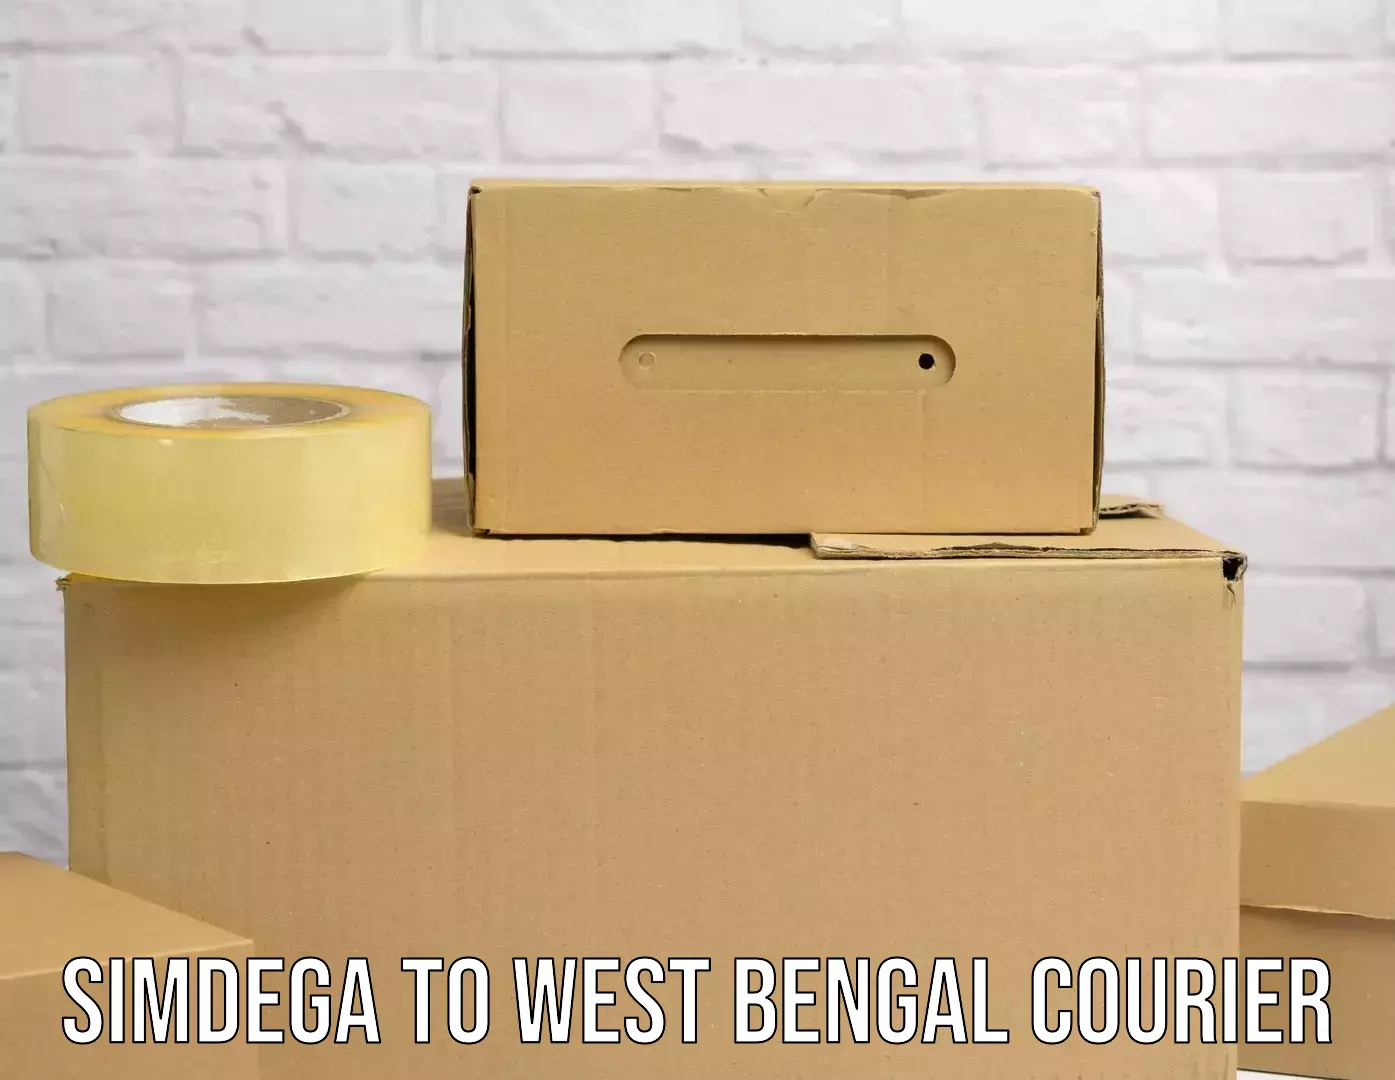 24-hour courier service Simdega to West Bengal